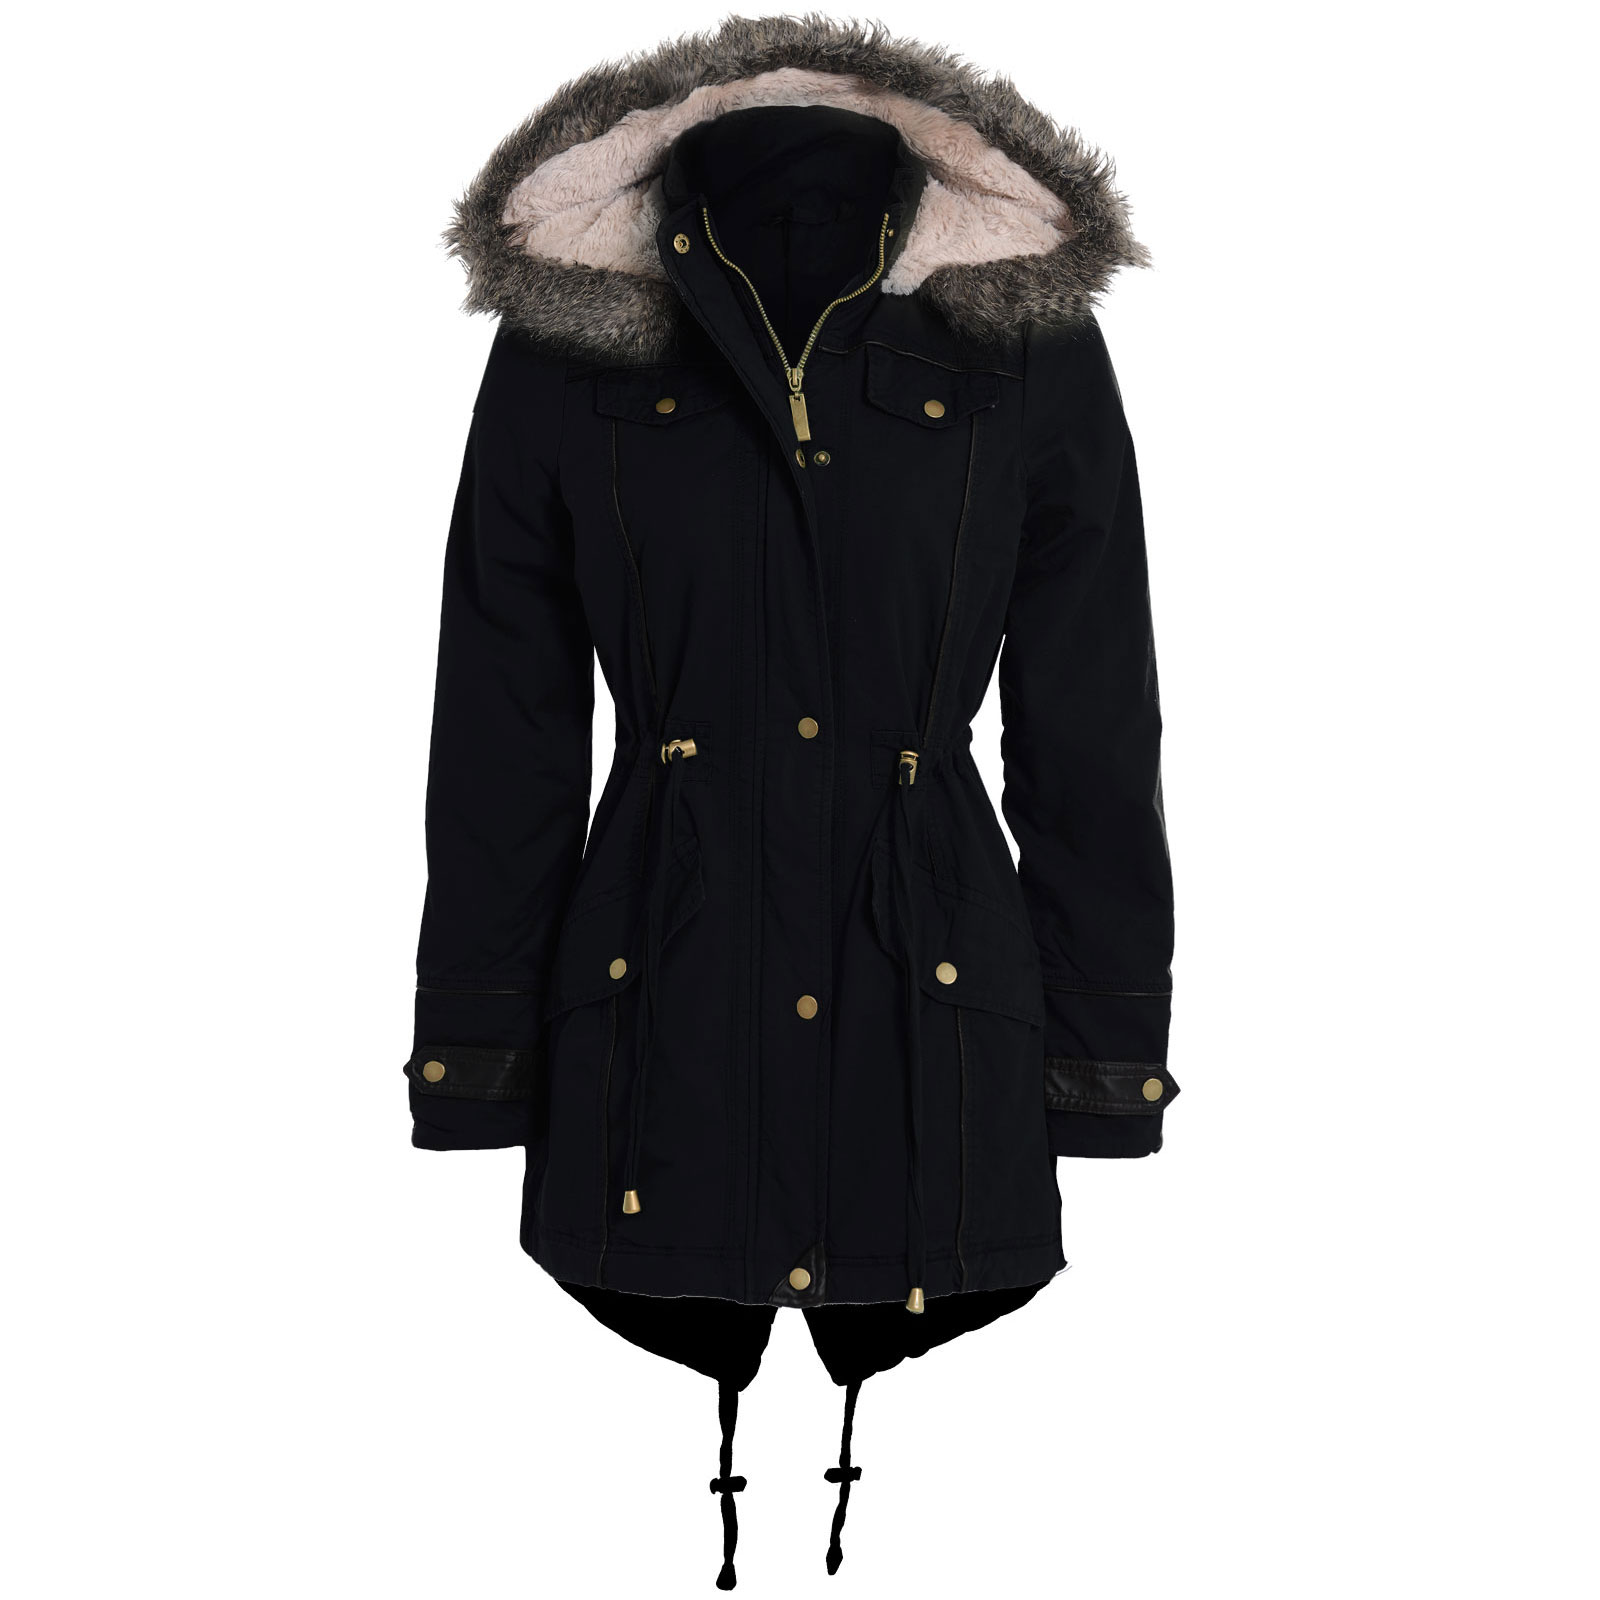 Black Winter Coat with Fur Hood – Gives You the Best Stylish Look | Fit